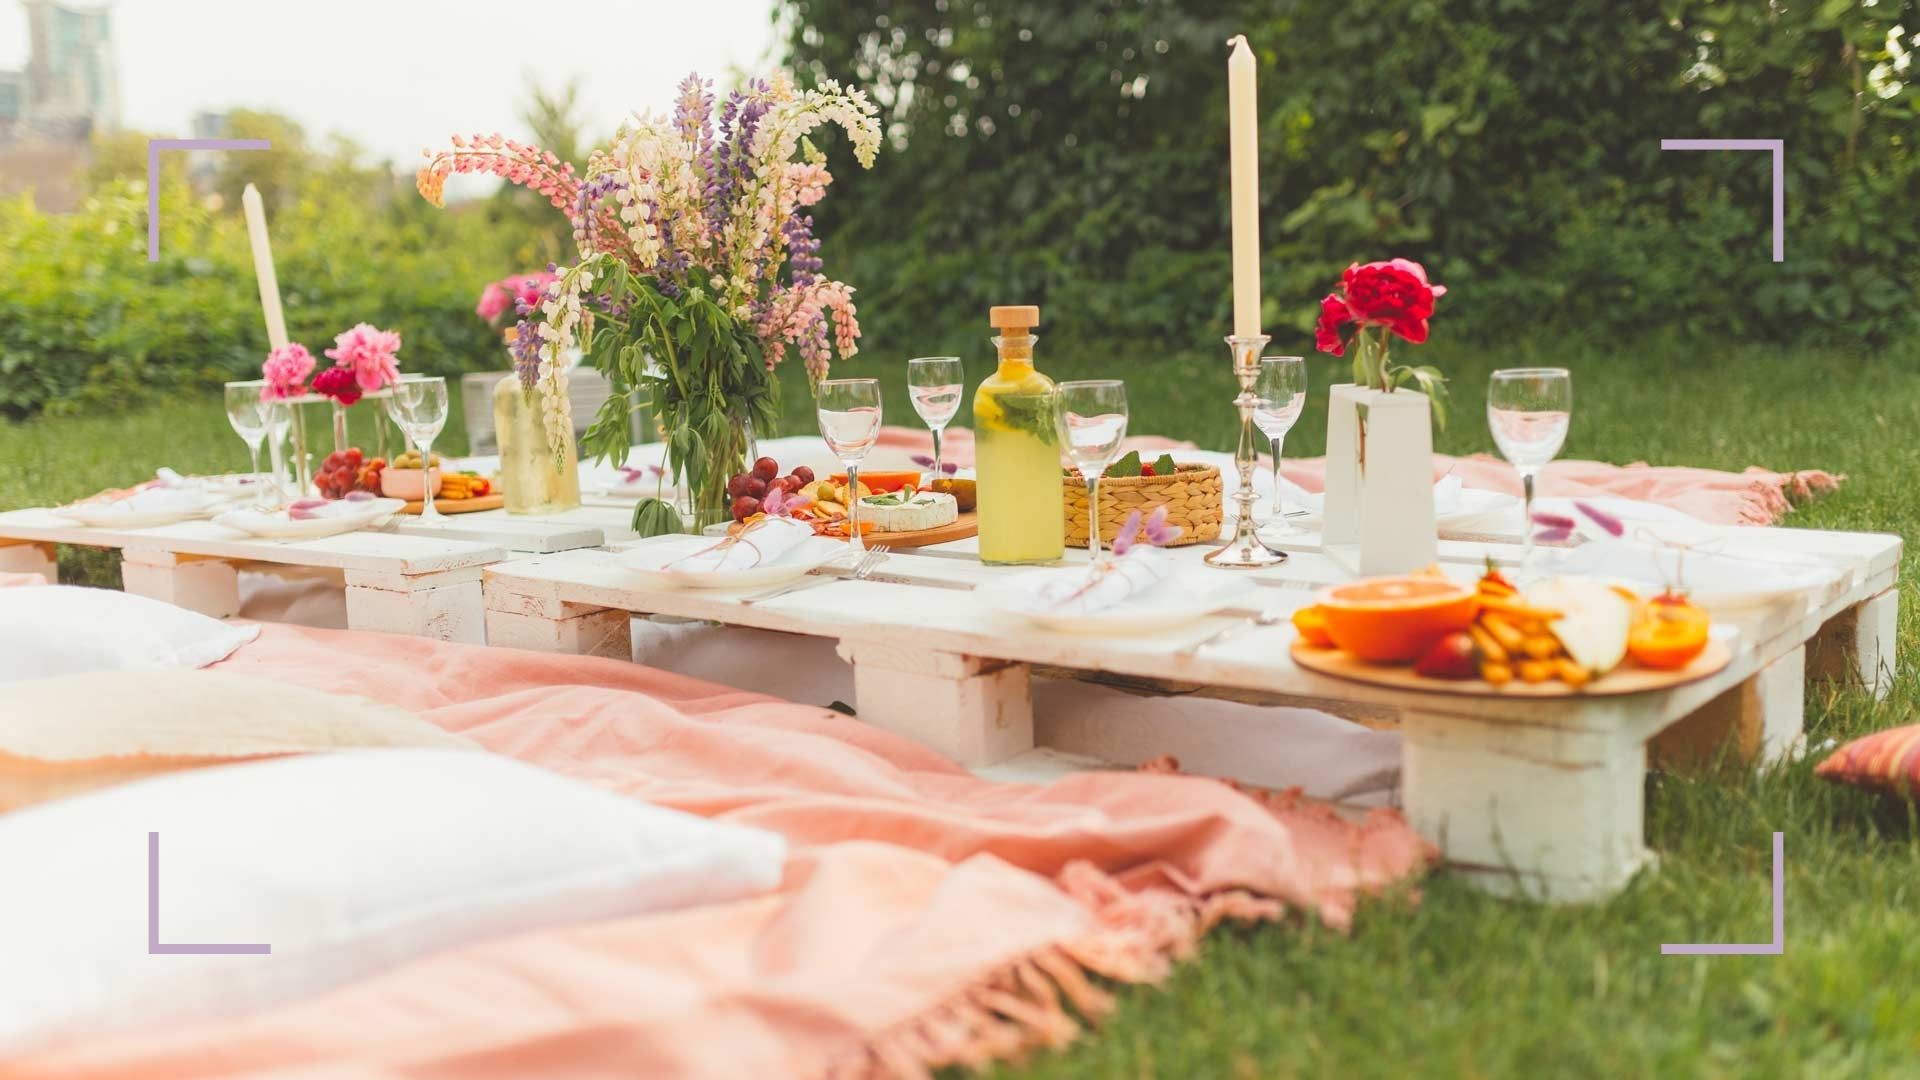 9 Garden party themes for memorable outdoor celebrations